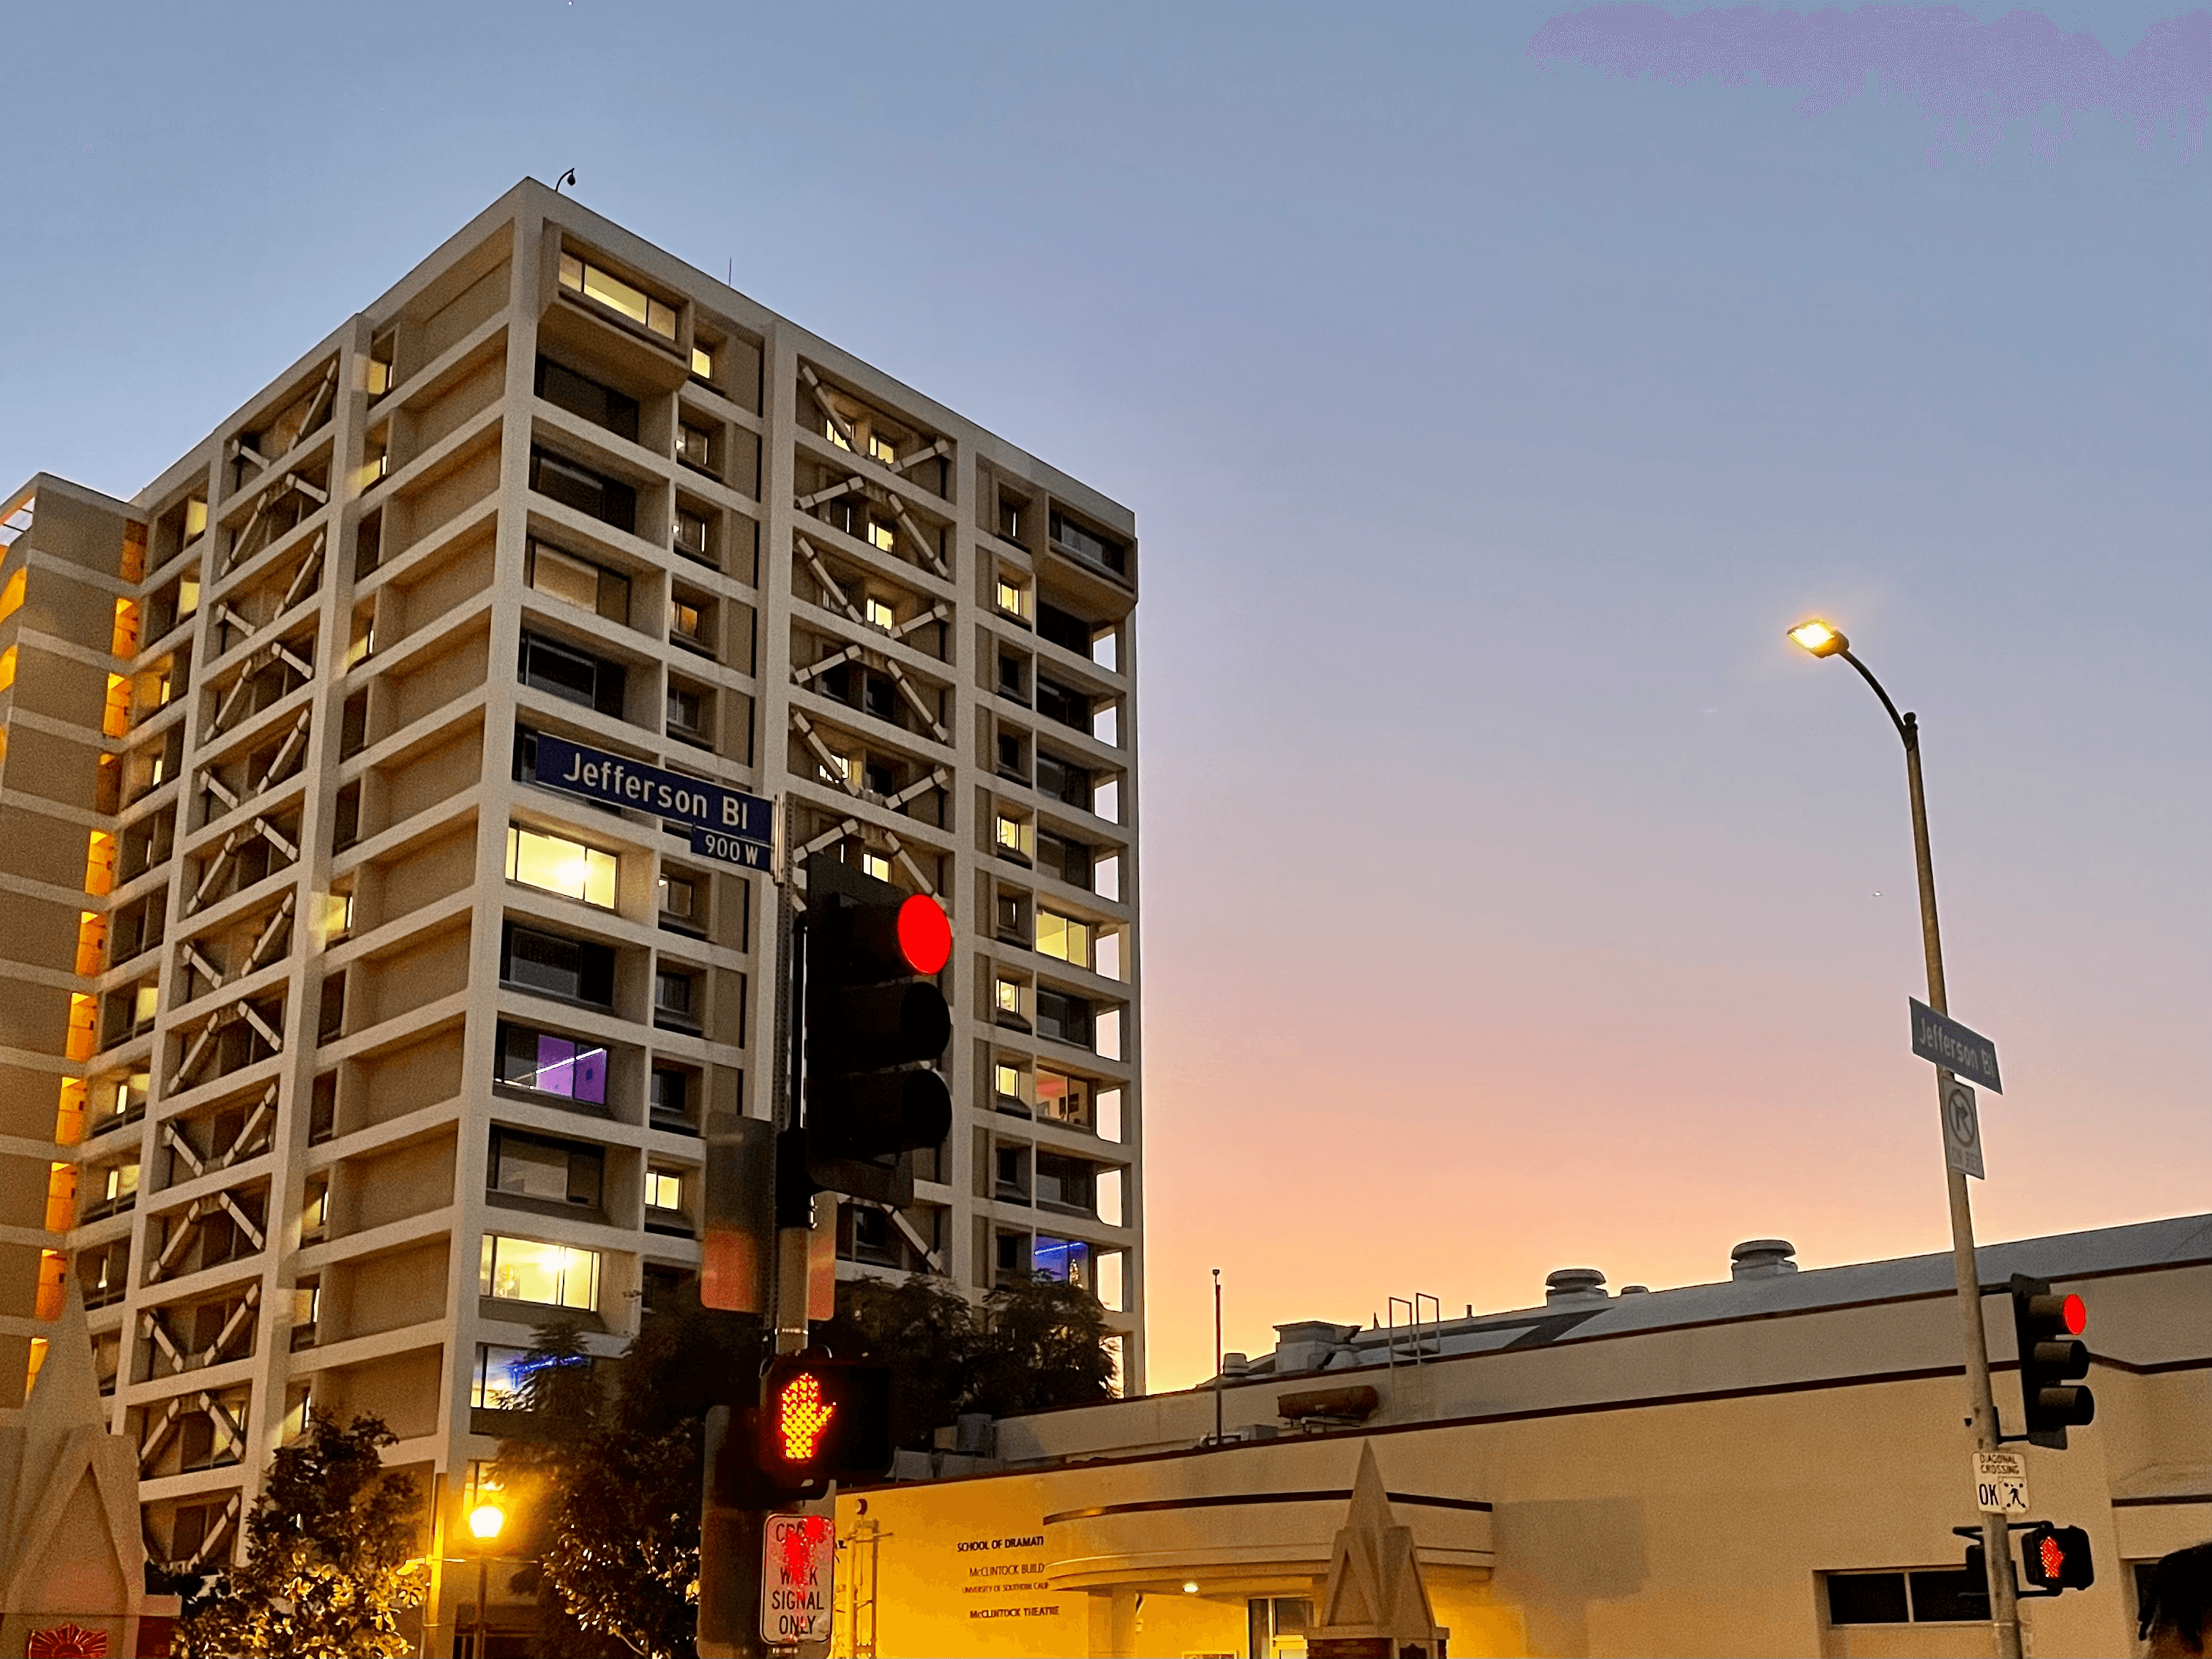 Webb Tower during dusk from the intersection of McClintock Avenue and Jefferson Boulevard